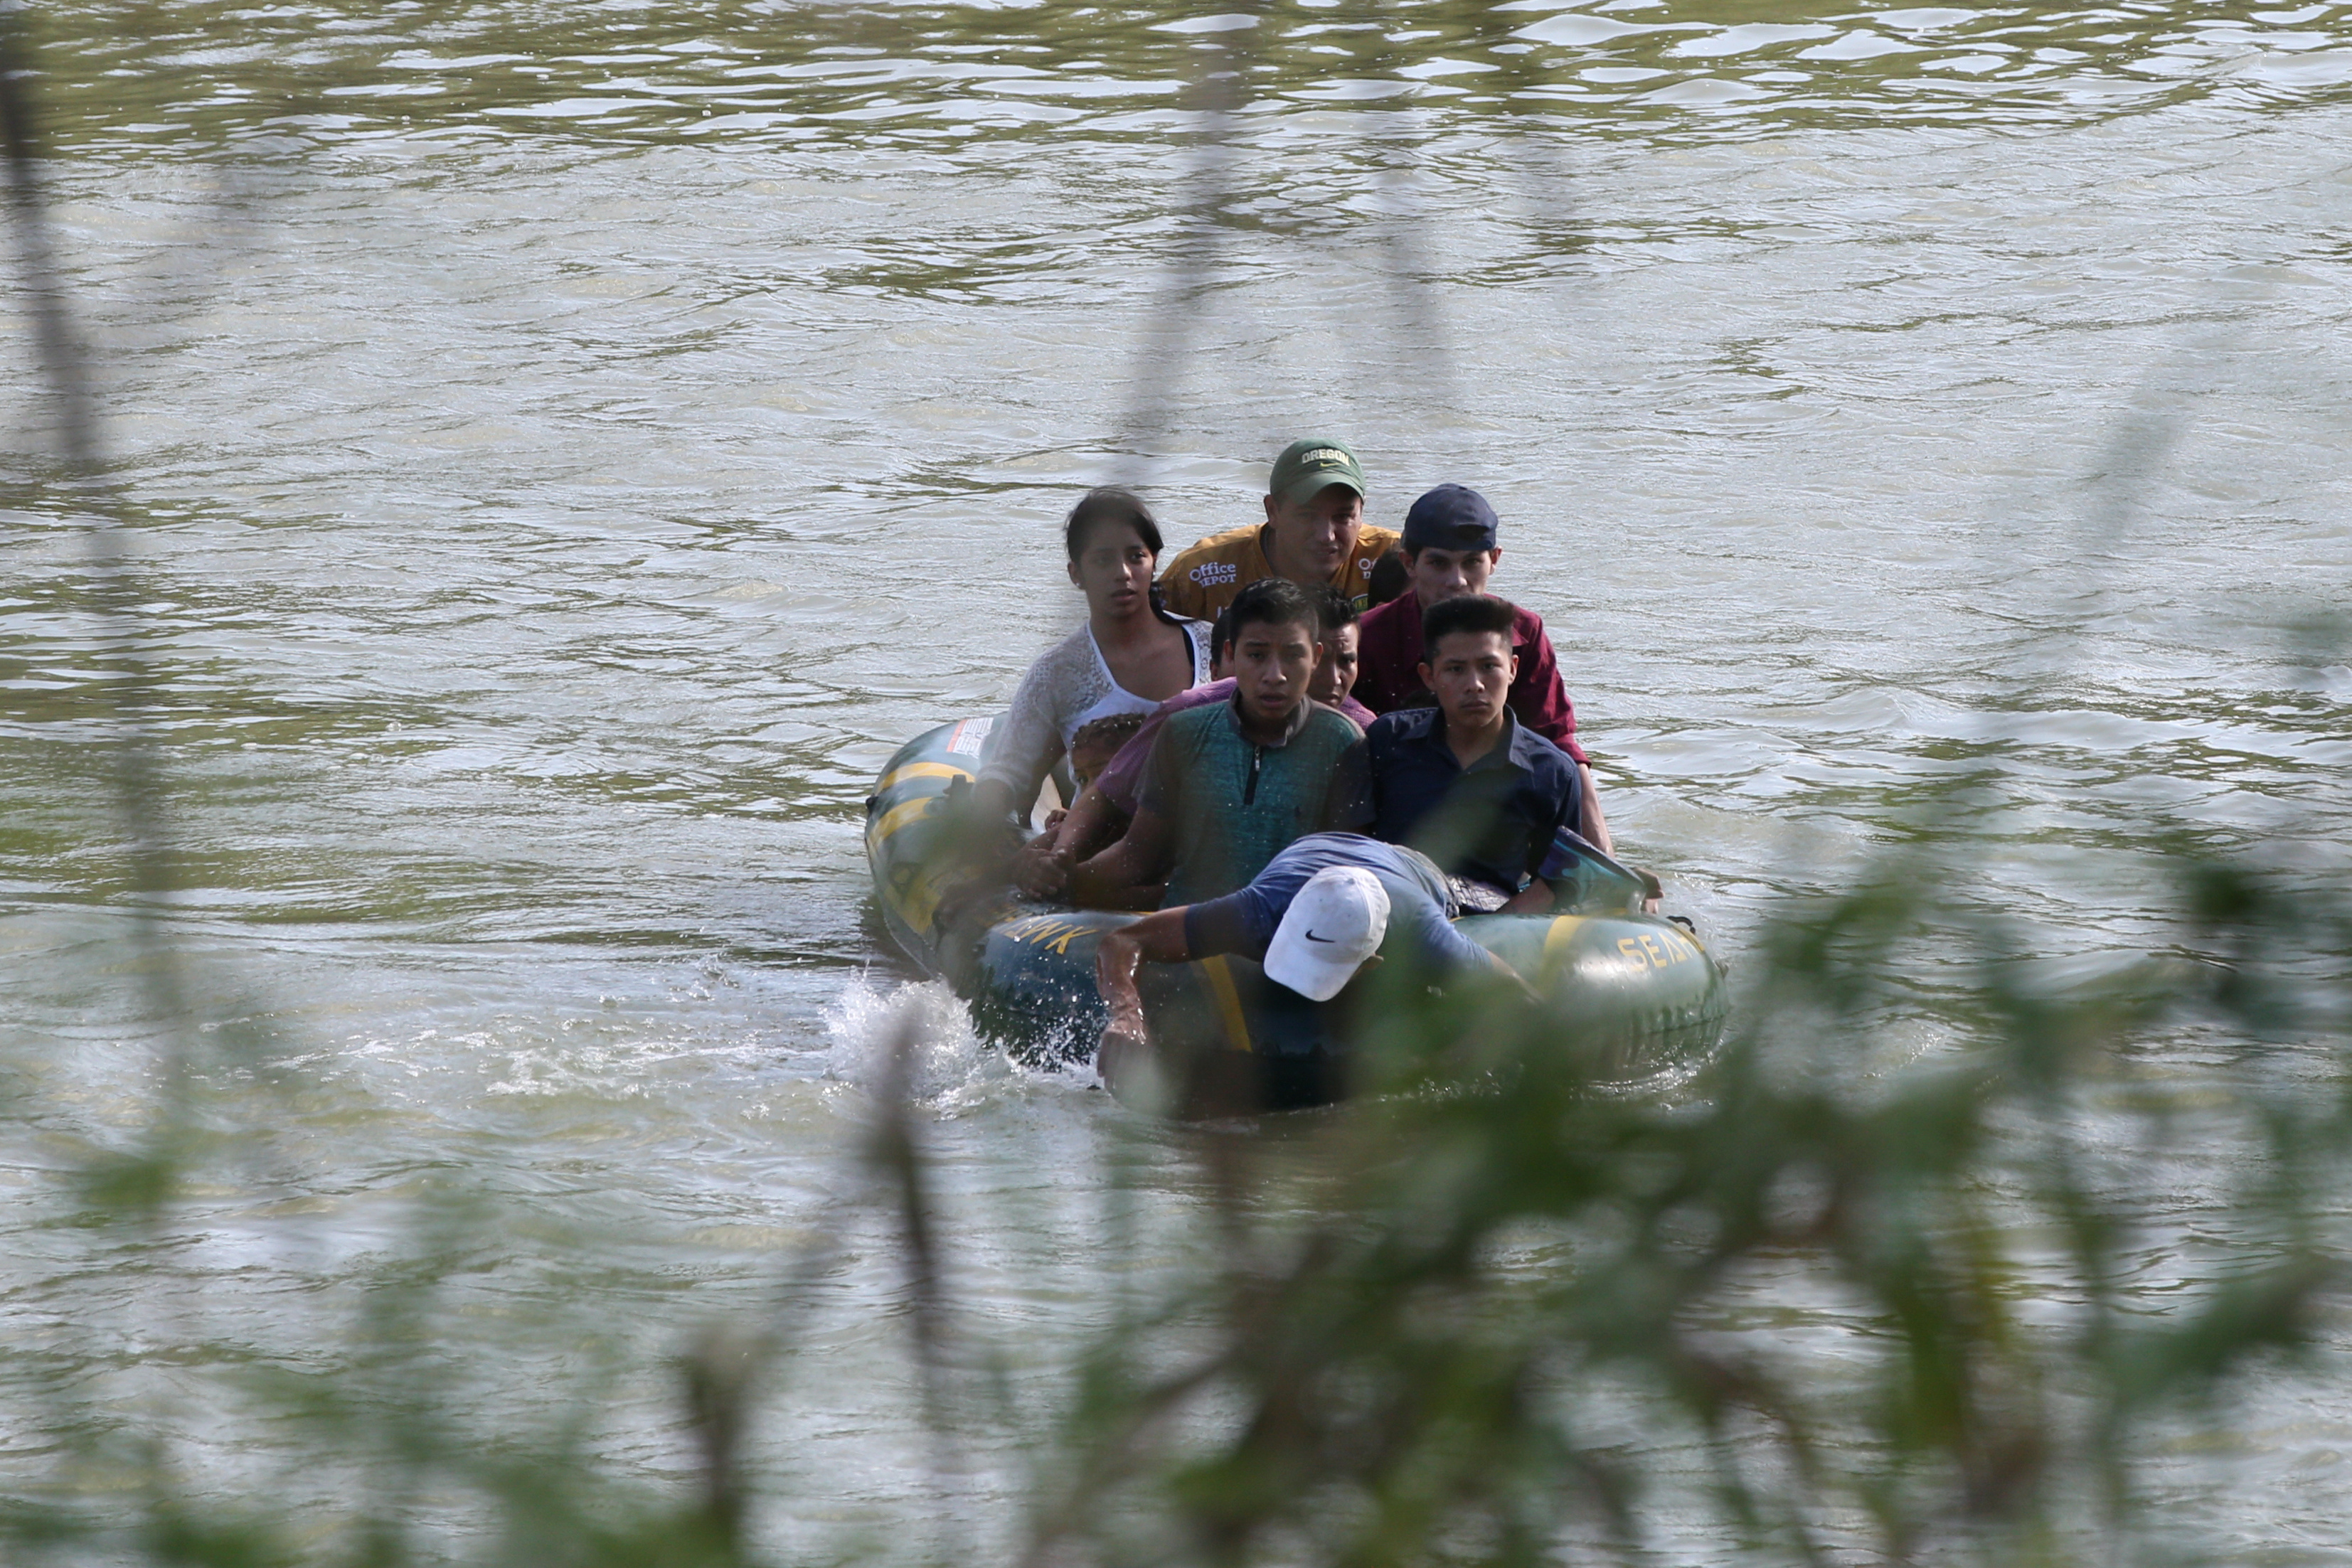 A suspected smuggler uses his arms to paddle a raft of immigrants across the Rio Grande in an illegal crossing of the Mexico-U.S. border near McAllen, Texas, U.S., May 9, 2018. REUTERS/Loren Elliott - RC180A119780